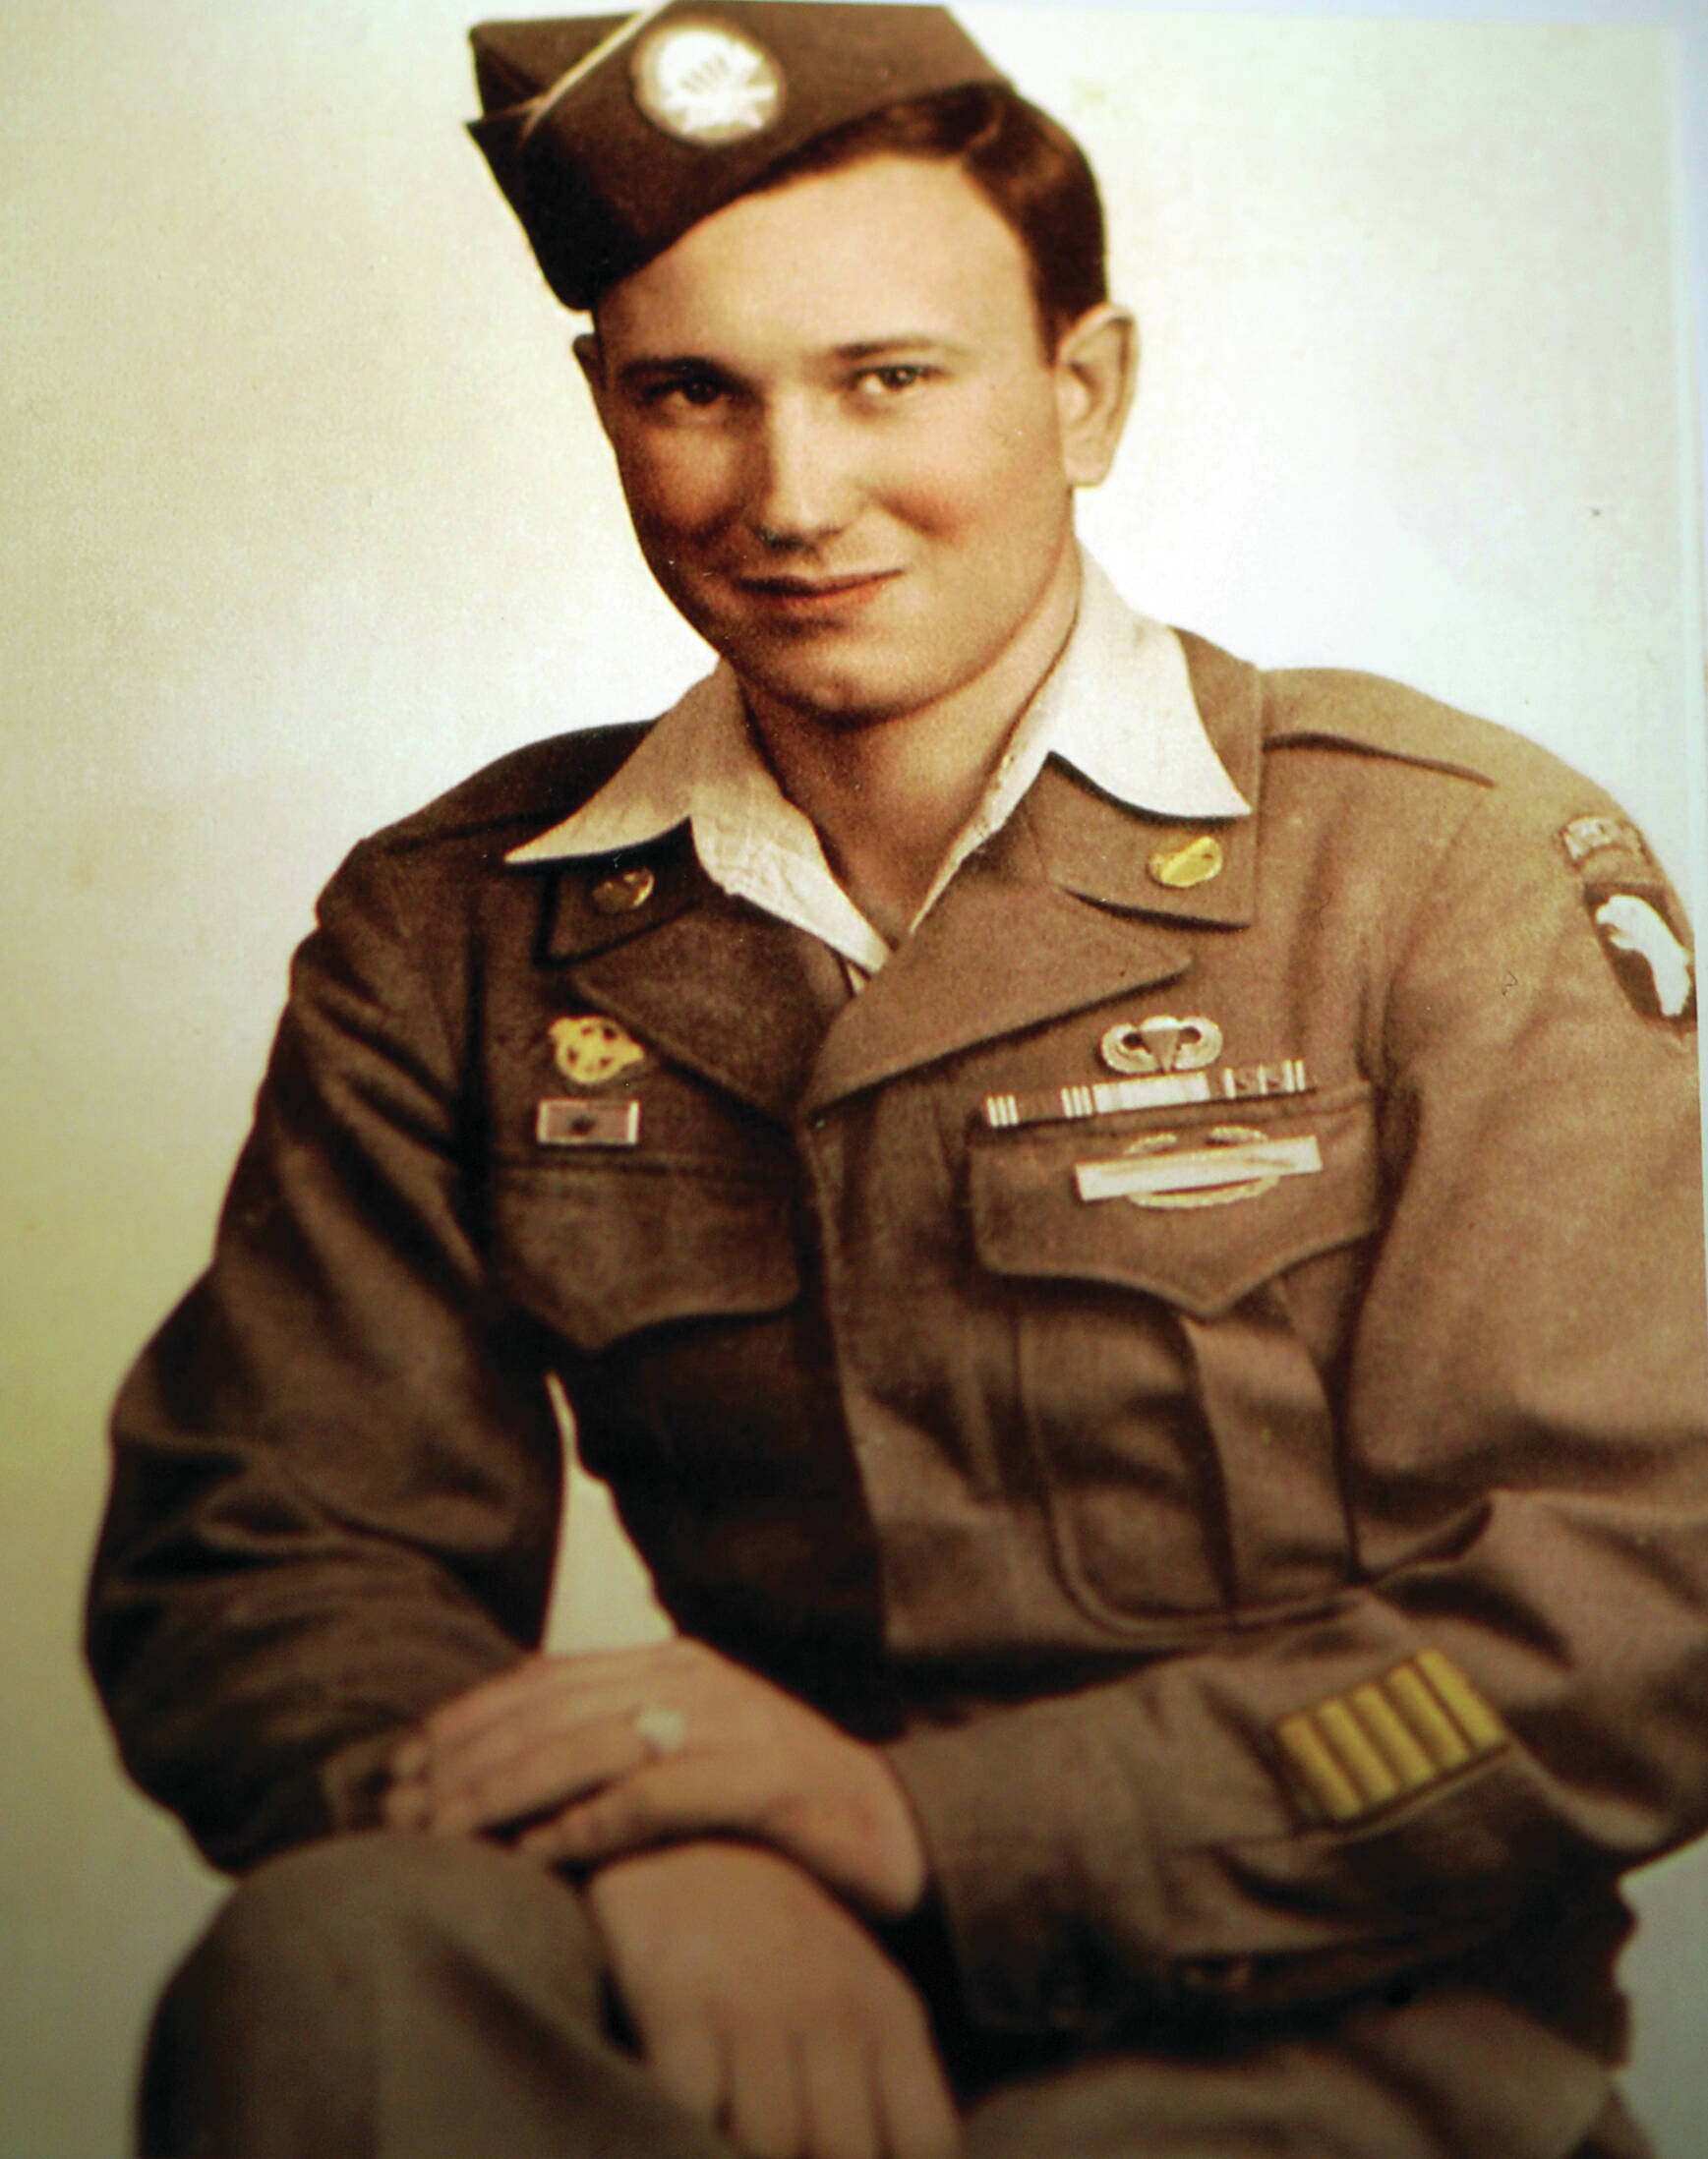 Photo courtesy of the Ball Family Collection
After being honorably discharged from the U.S. Army in 1945, Arlon Elwood “Jackson” Ball posed for this photograph, demonstrating his five years of military service through his many ribbons, badges and patches.